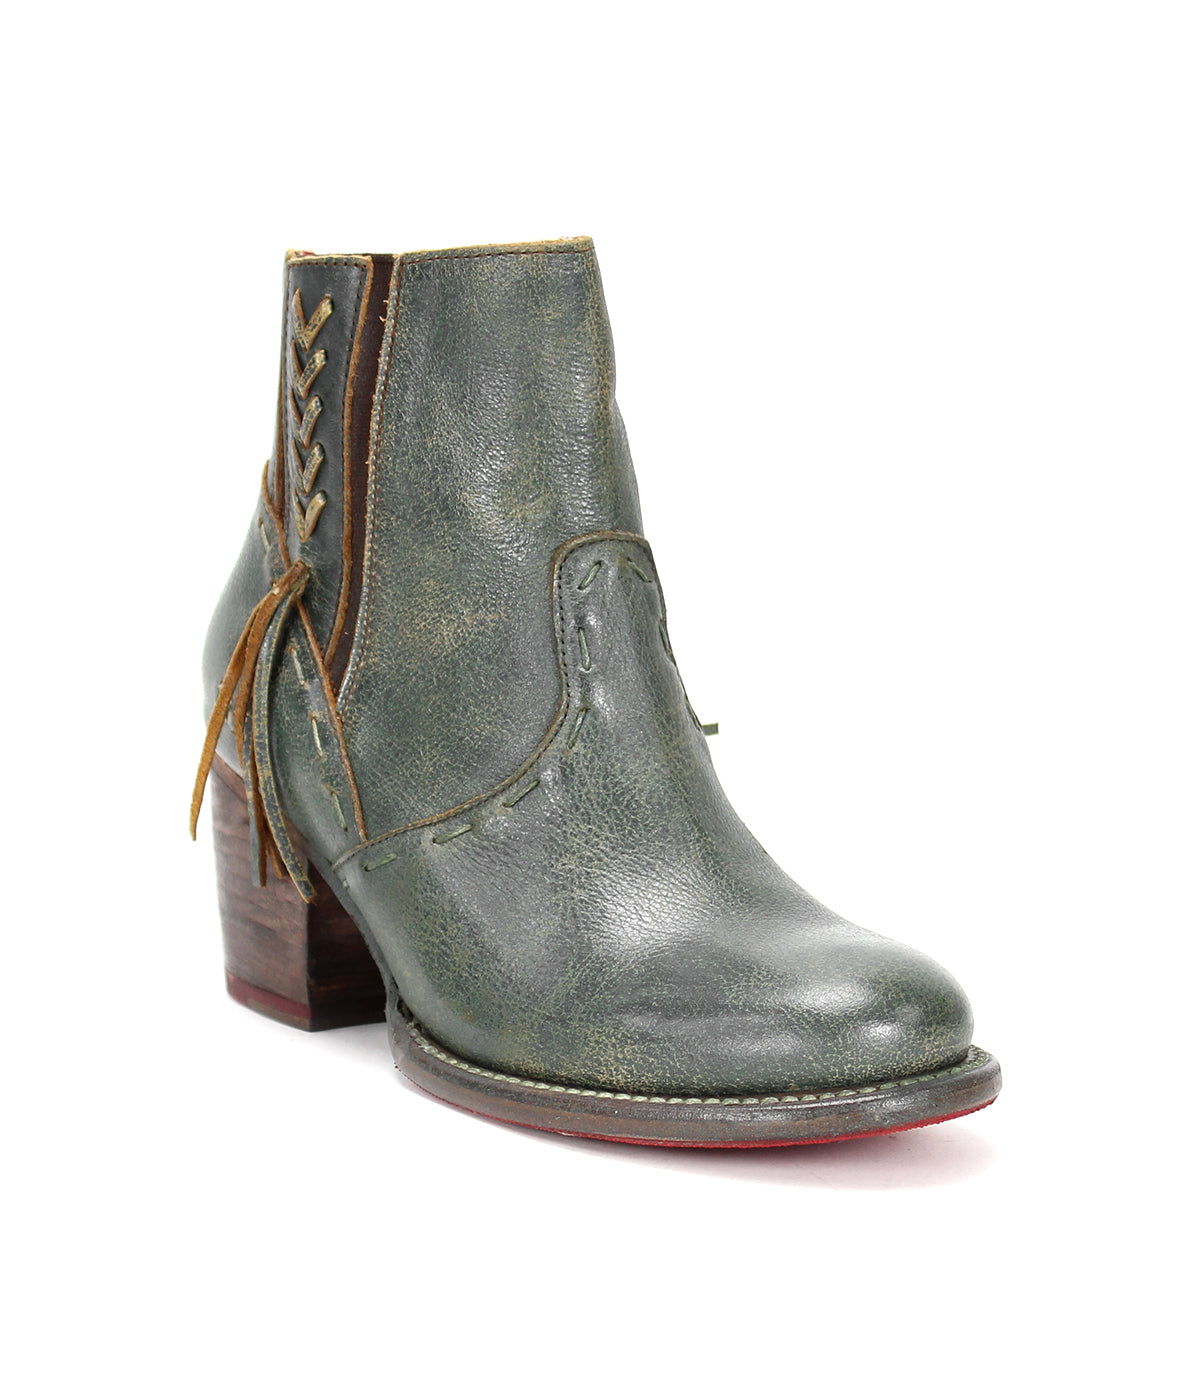 A women's green leather ankle boot with a wooden heel named Celestine by Bed Stu.